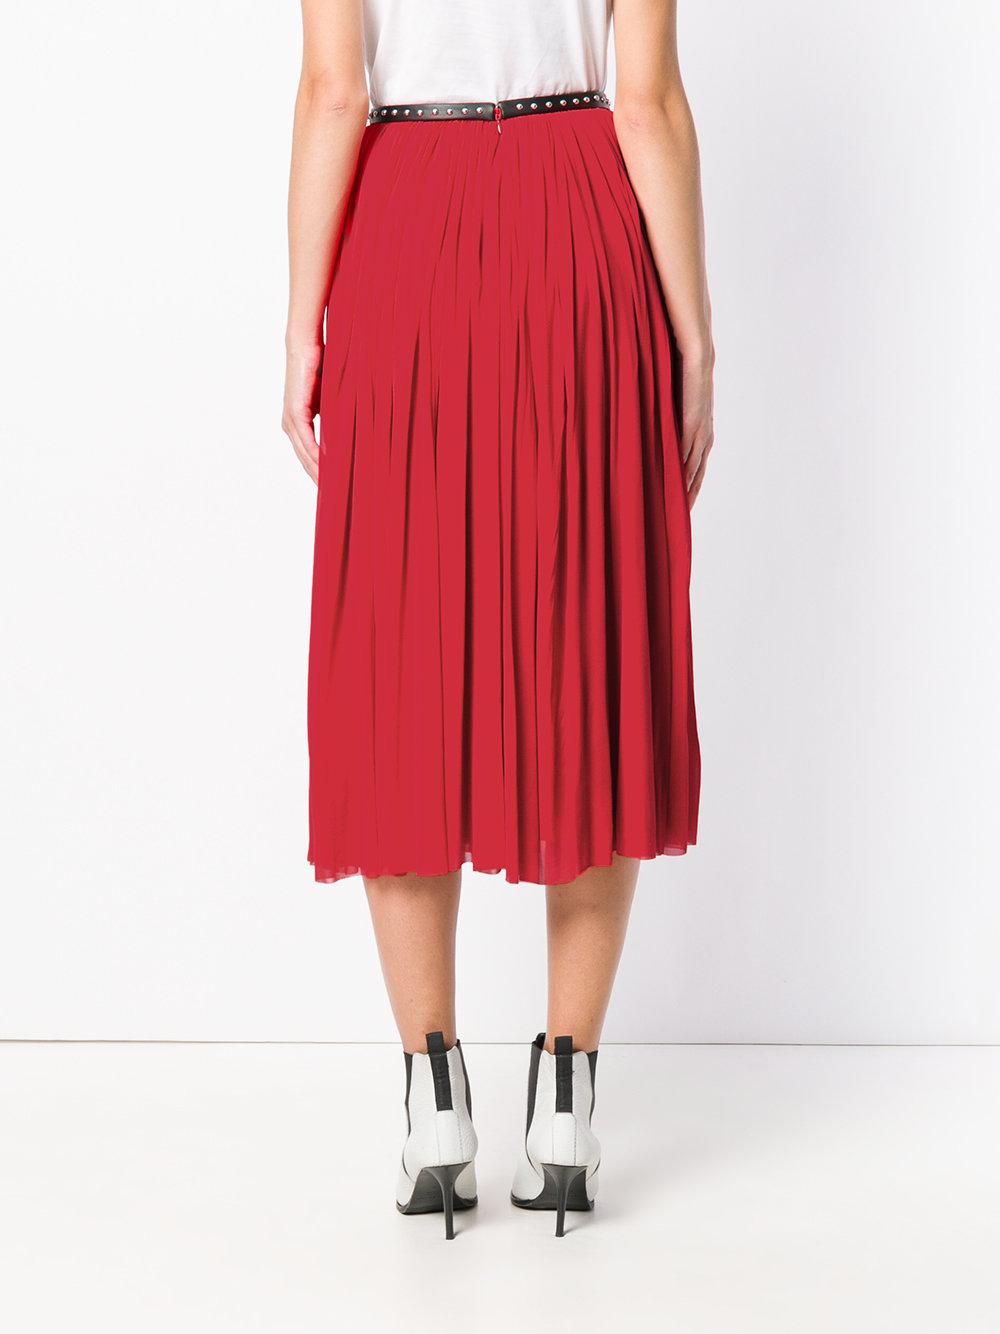 Alexander McQueen Synthetic Pleated Midi Skirt in Red - Lyst